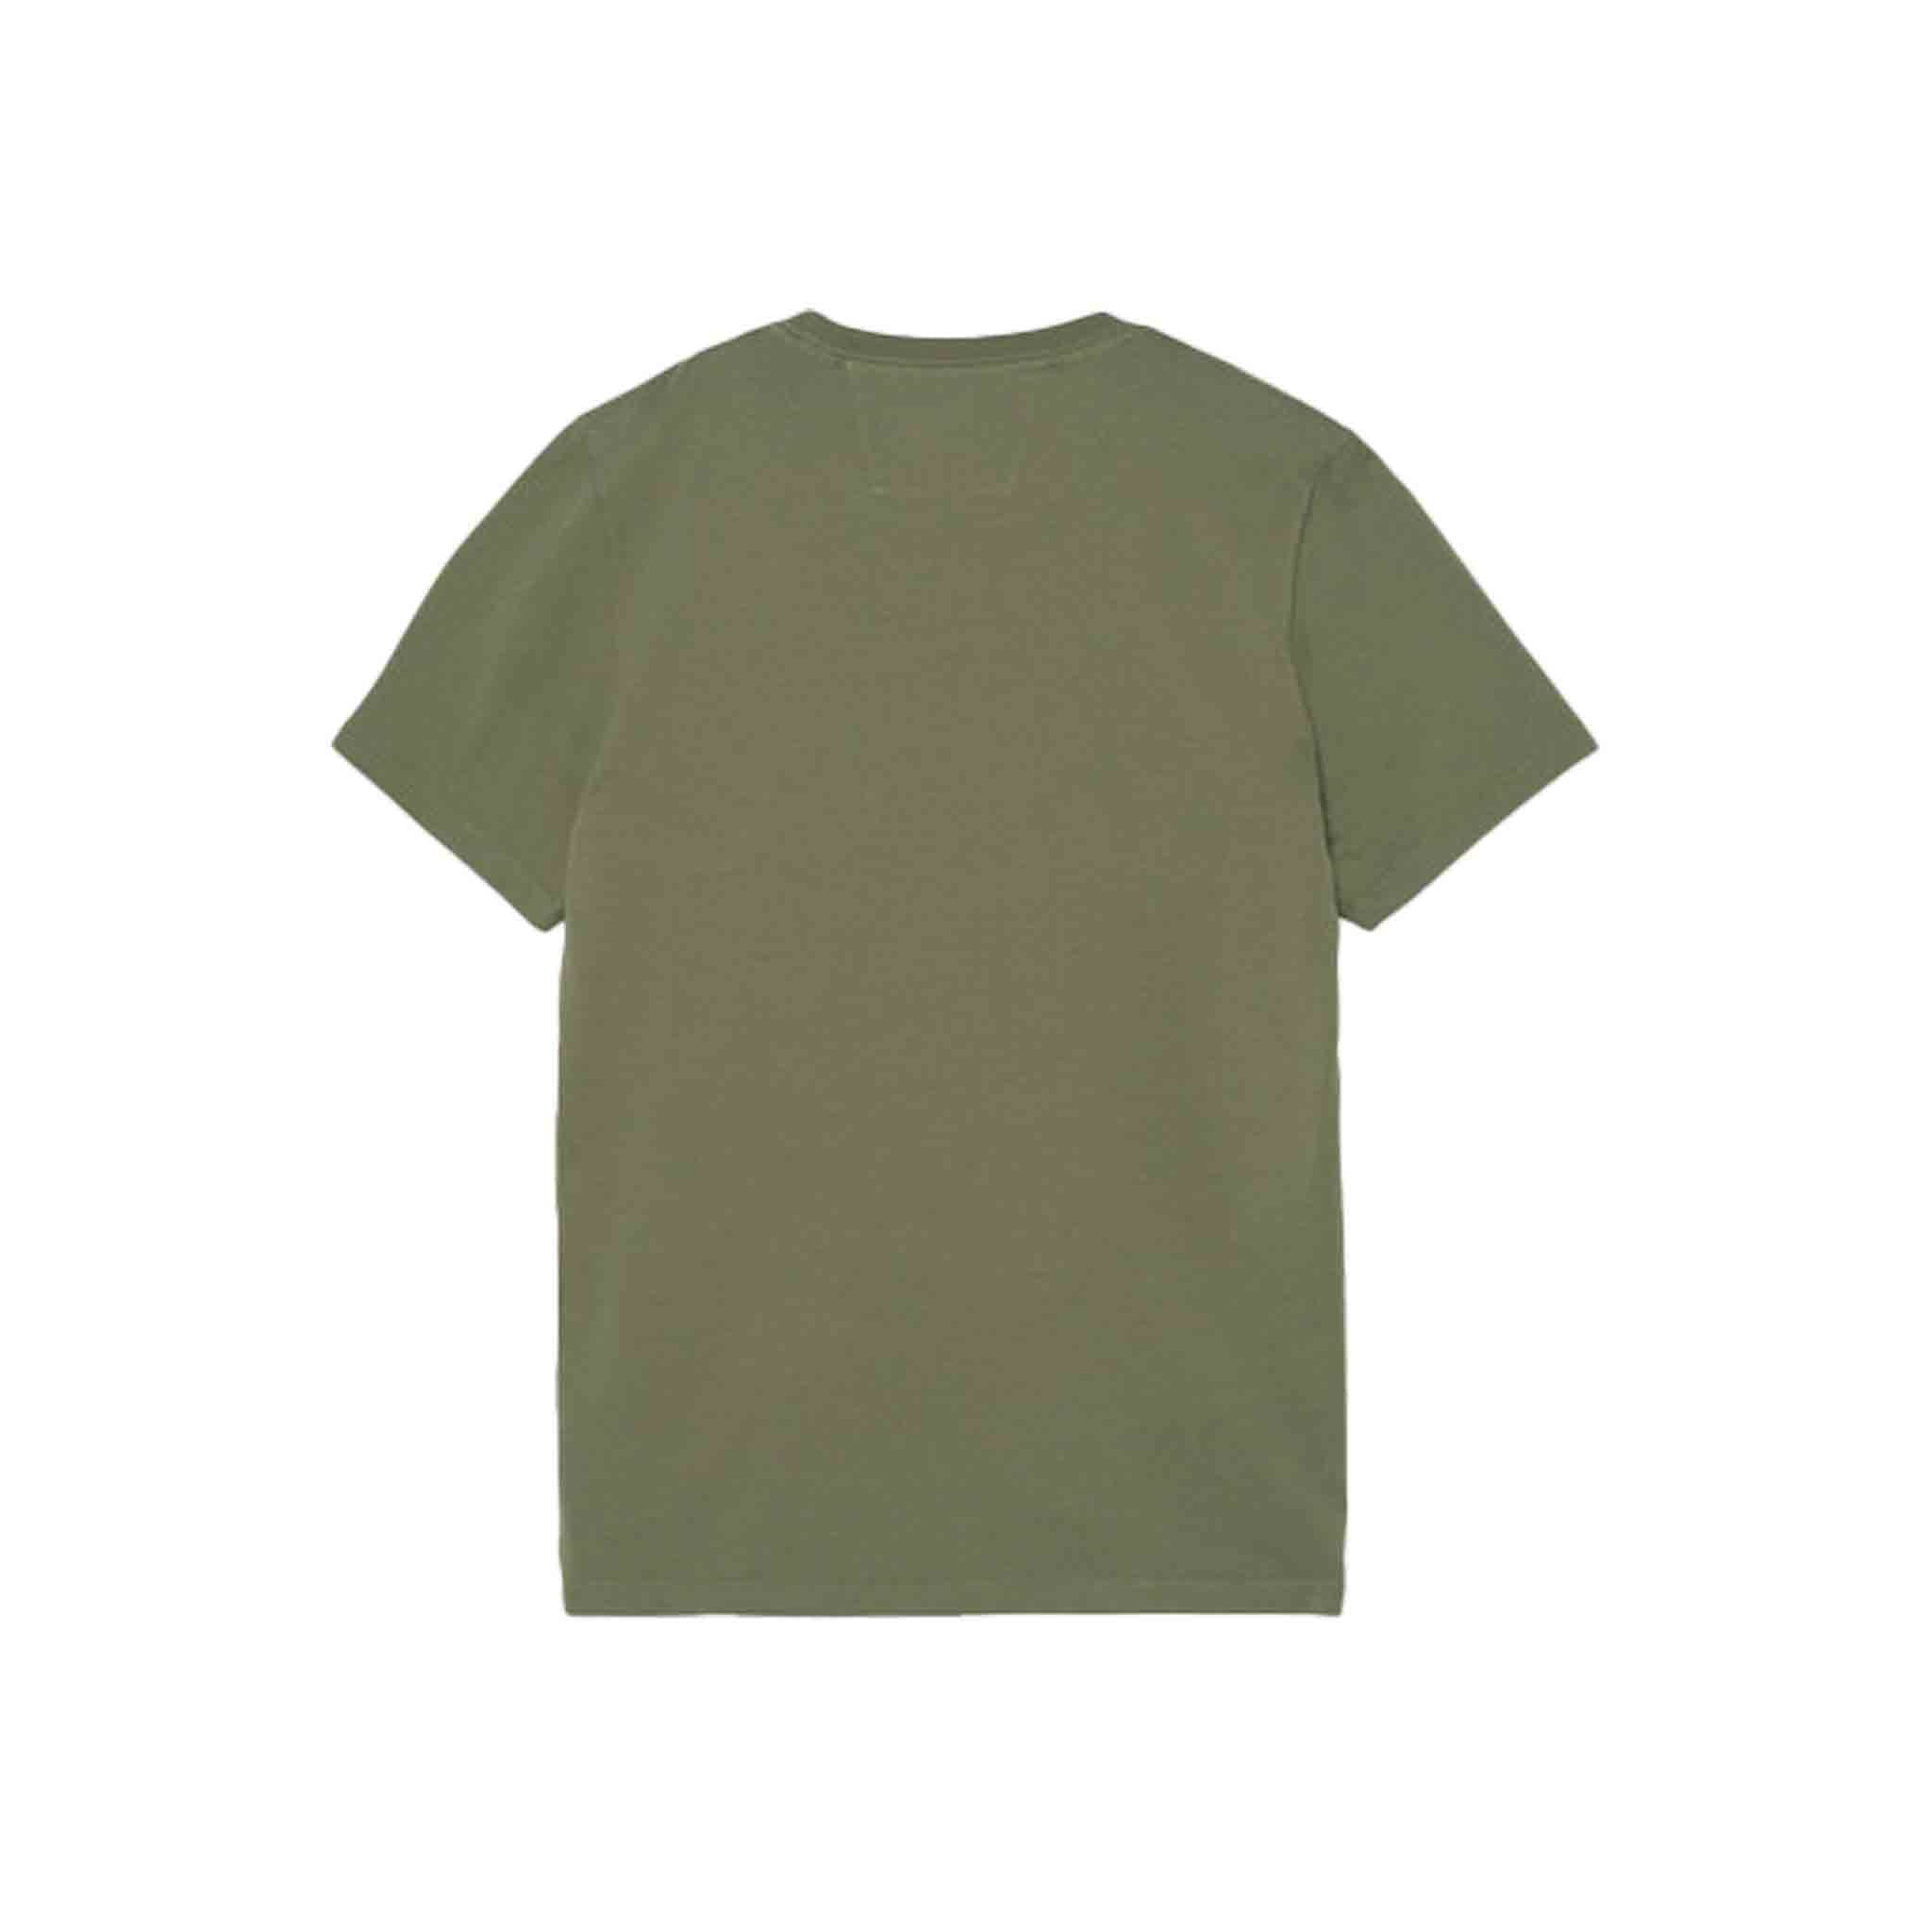 C.P. Company 30/1 Jersey Large Logo T-shirt in Bronze Green